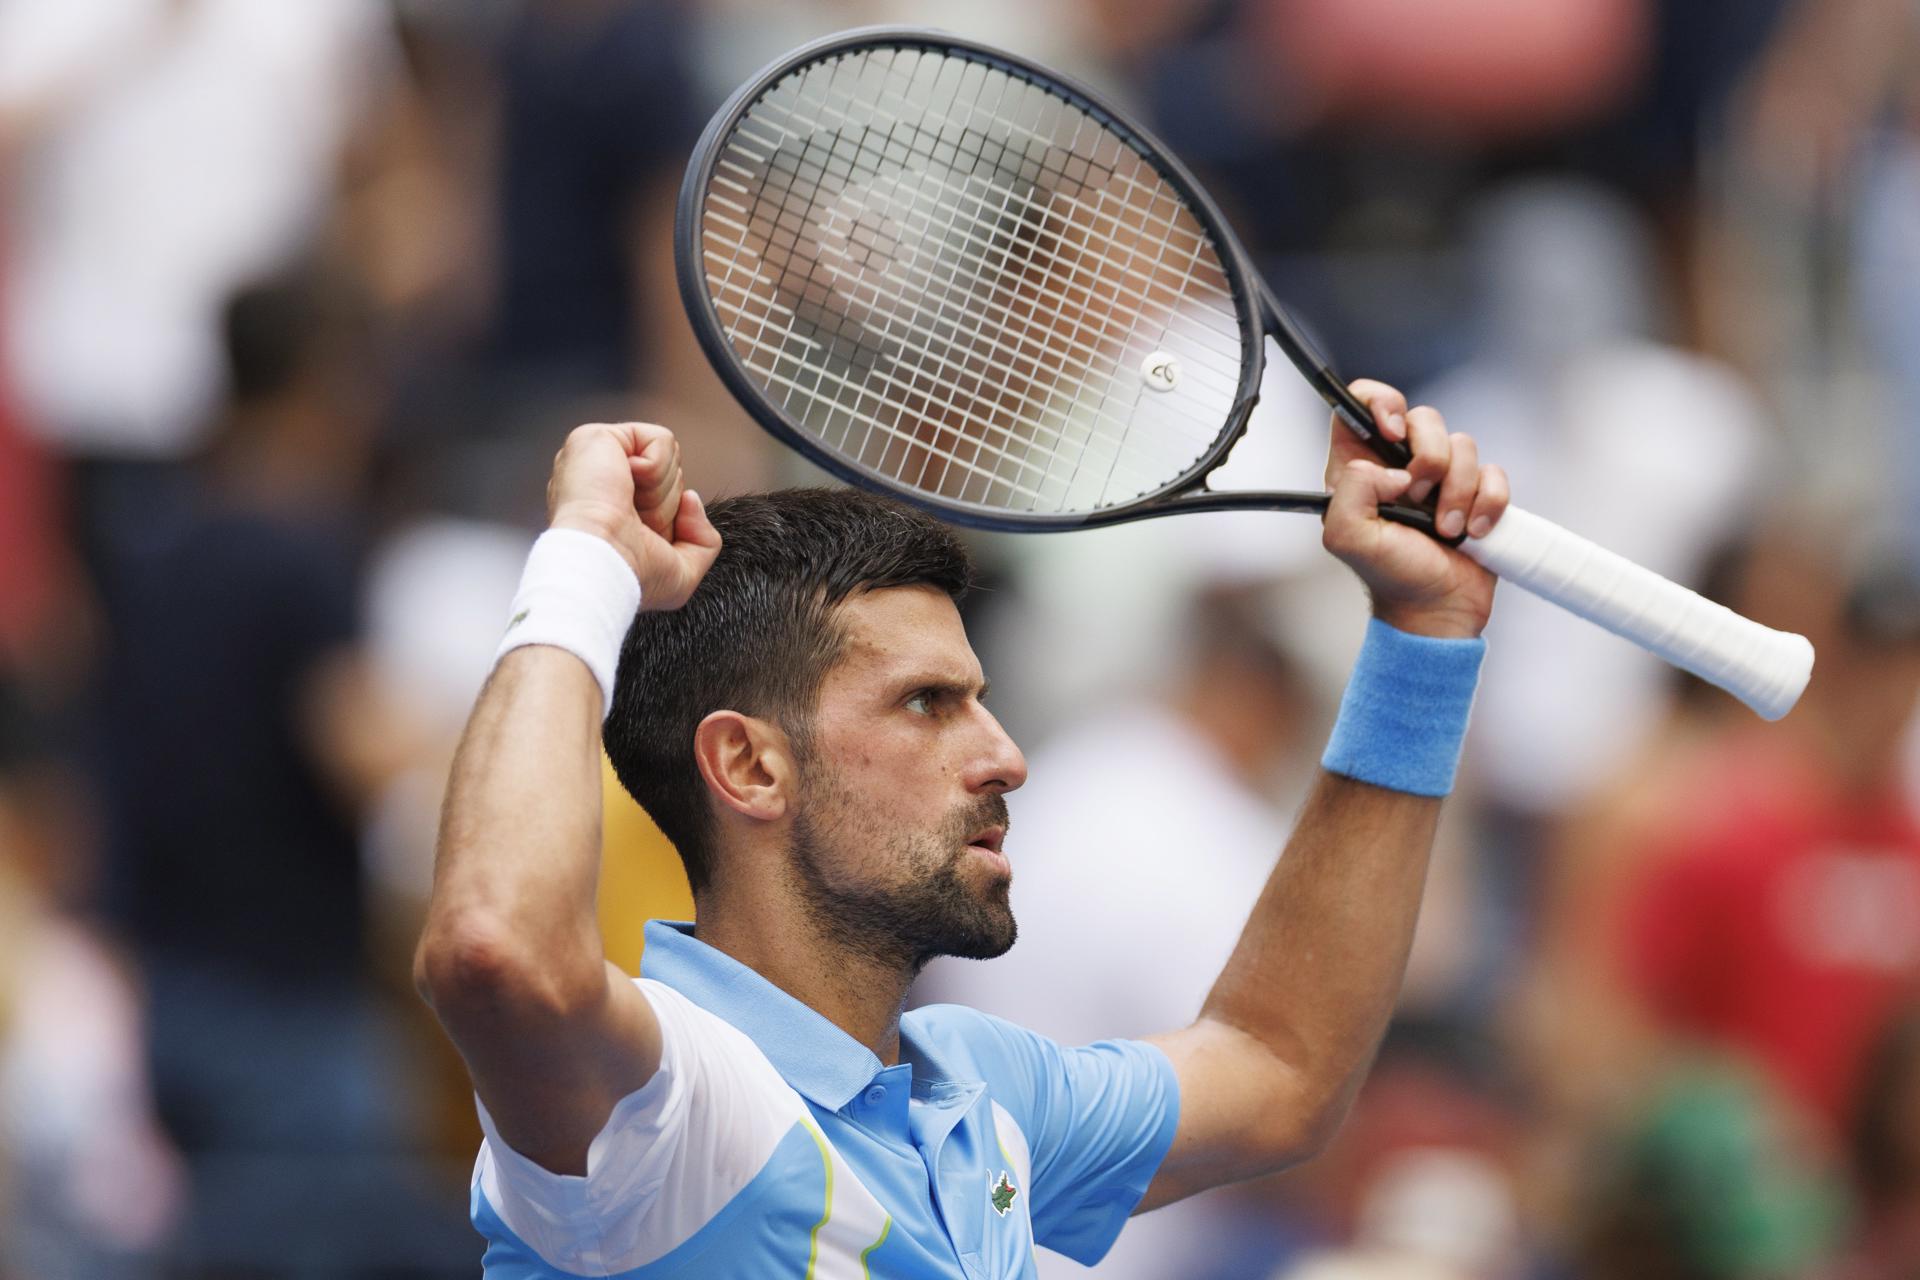 Novak Djokovic of Serbia gestures after defeating Bernabe Zapata Miralles of Spain in their second round match at the US Open Tennis Championships at the USTA National Tennis Center in Flushing Meadows, New York, USA, 30 August 2023. EFE-EPA/CJ GUNTHER